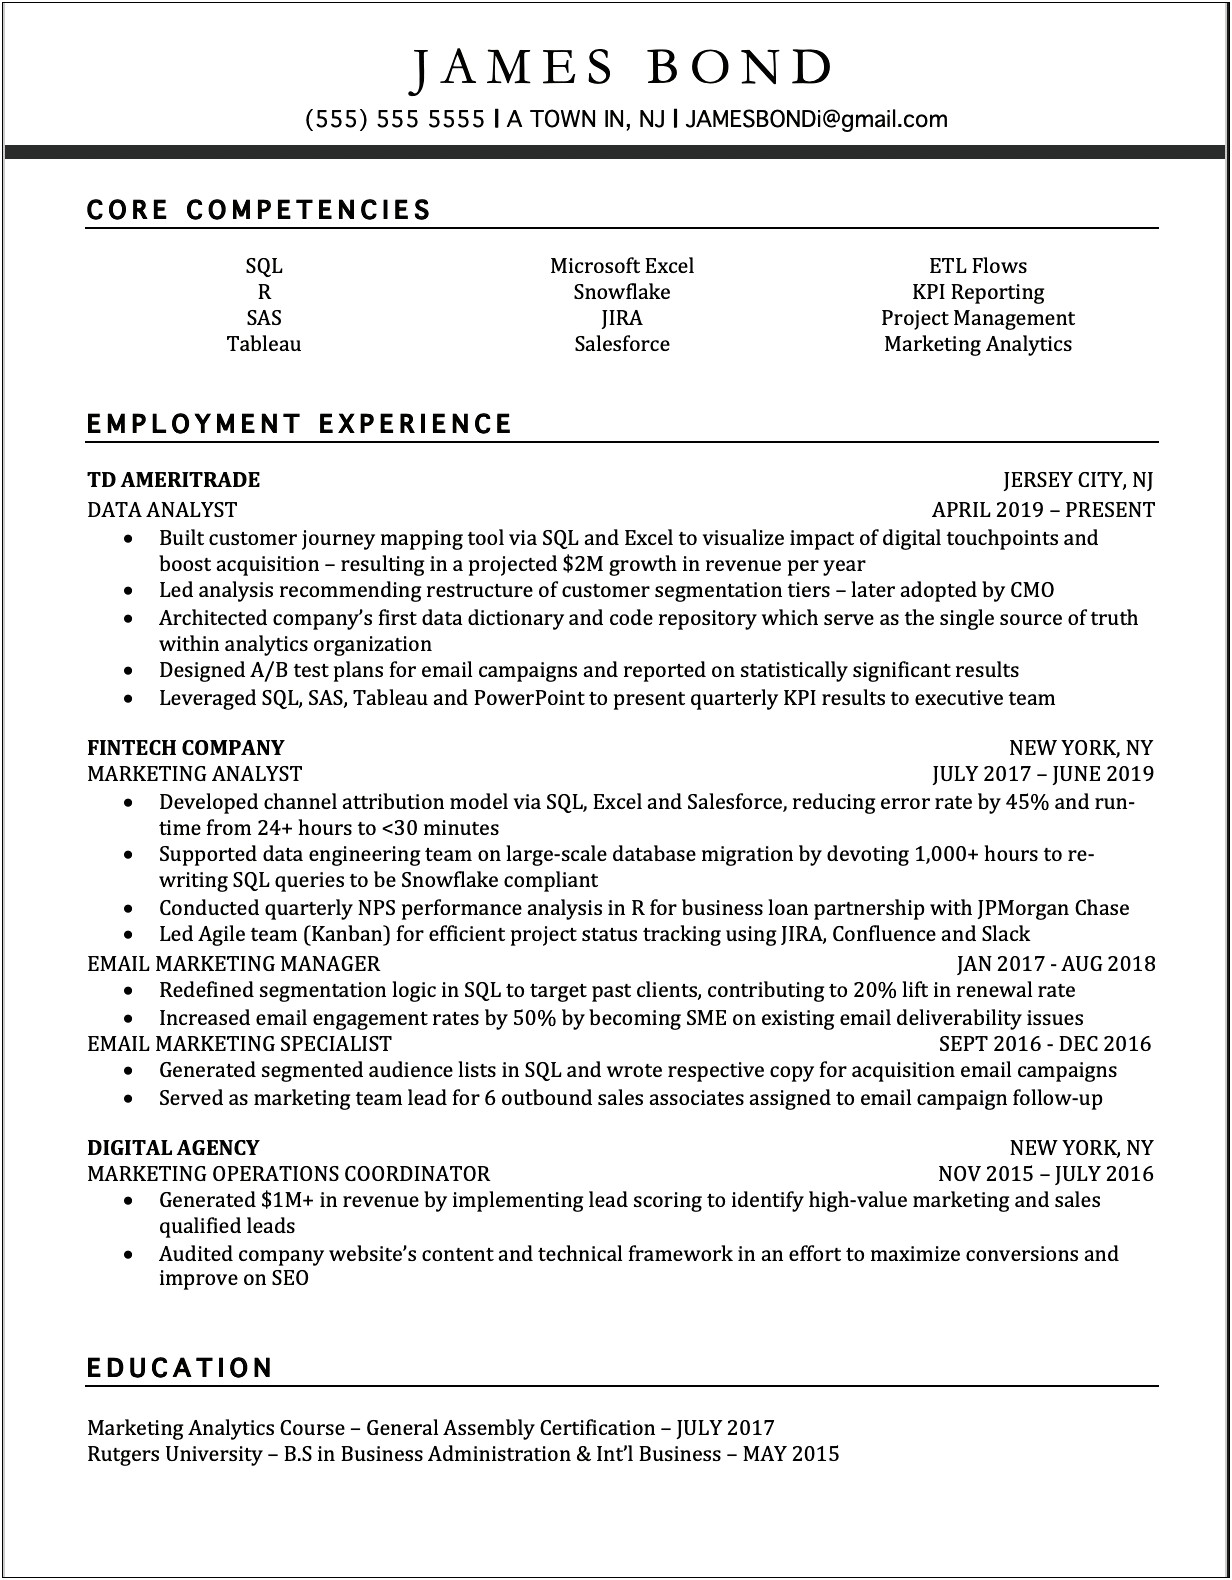 Resume Work Multiple Roles One Company